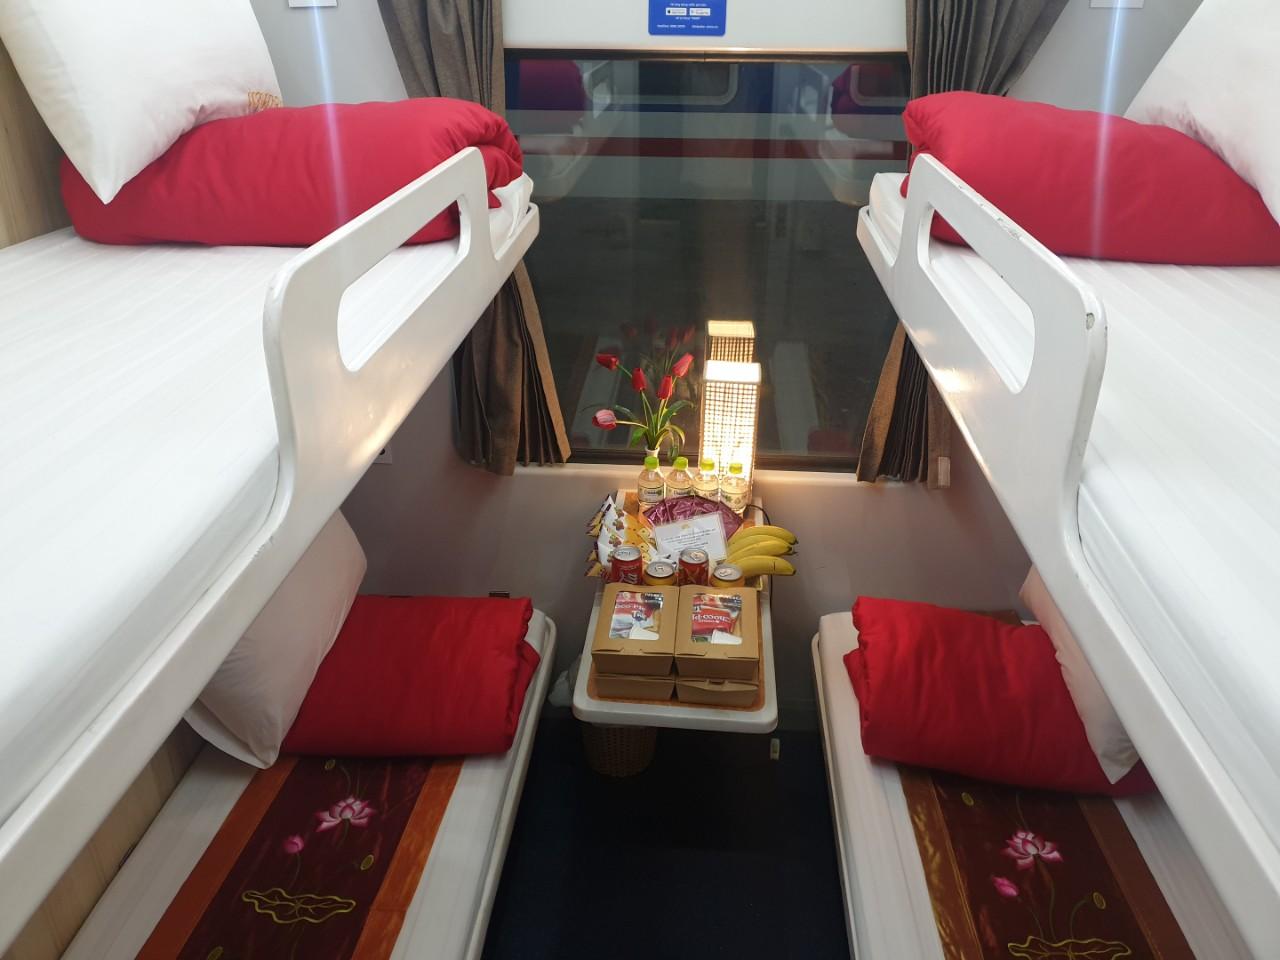 Ninh Binh – Hue on SE19 (22h10 – 09h30) Only available from 07 Feb 2023